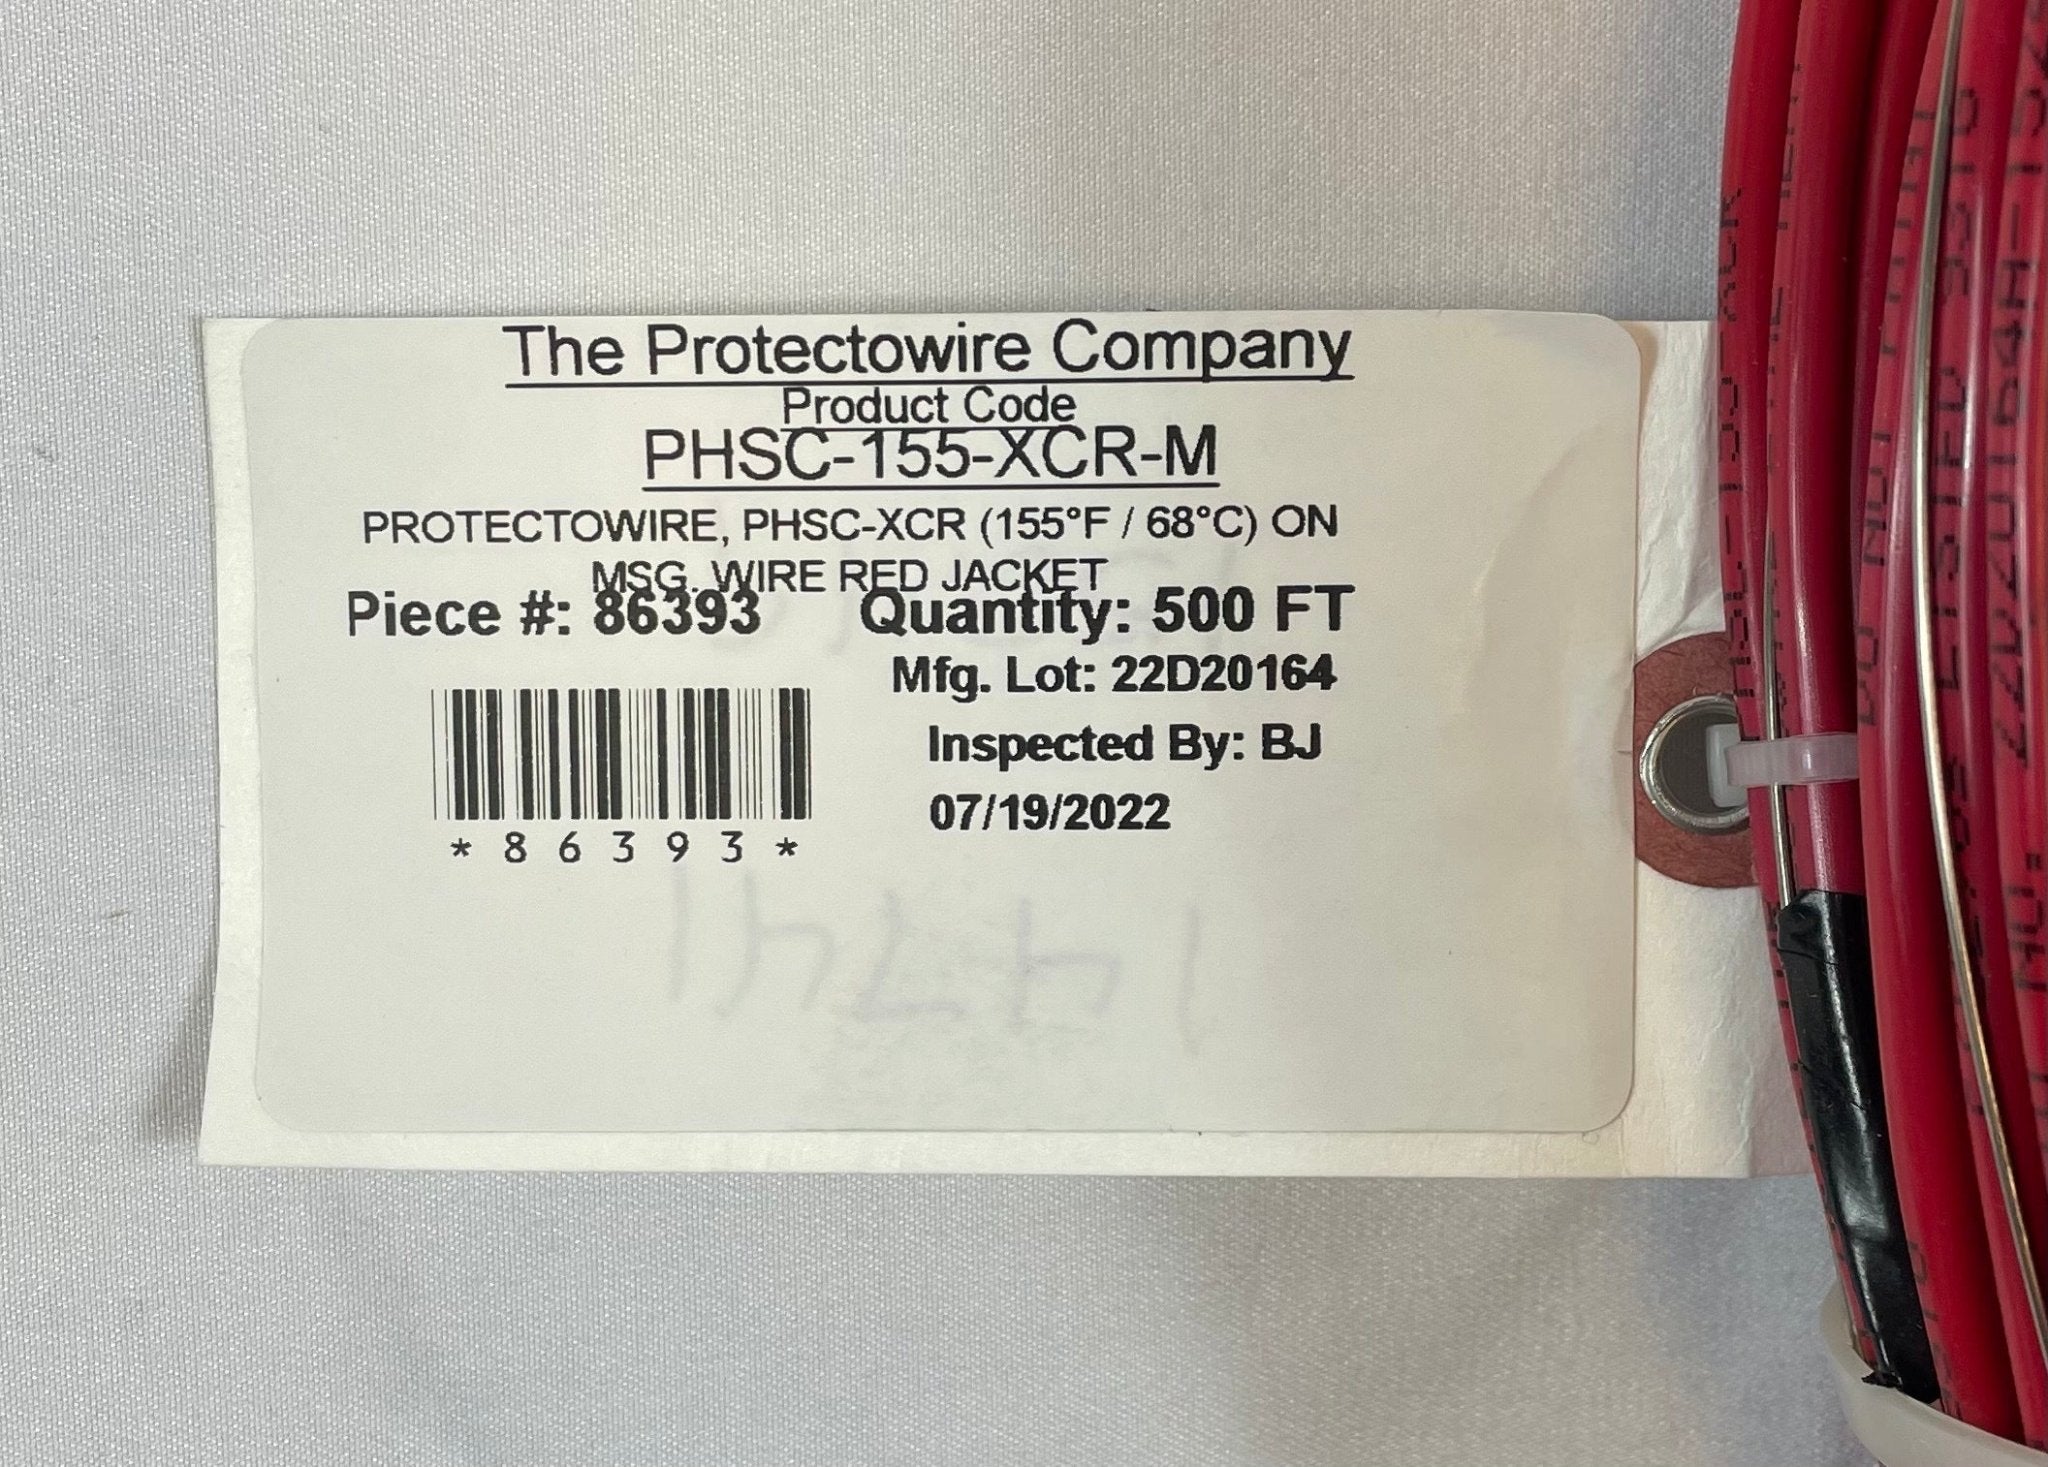 Protectowire PHSC-155-XCR-M - The Fire Alarm Supplier